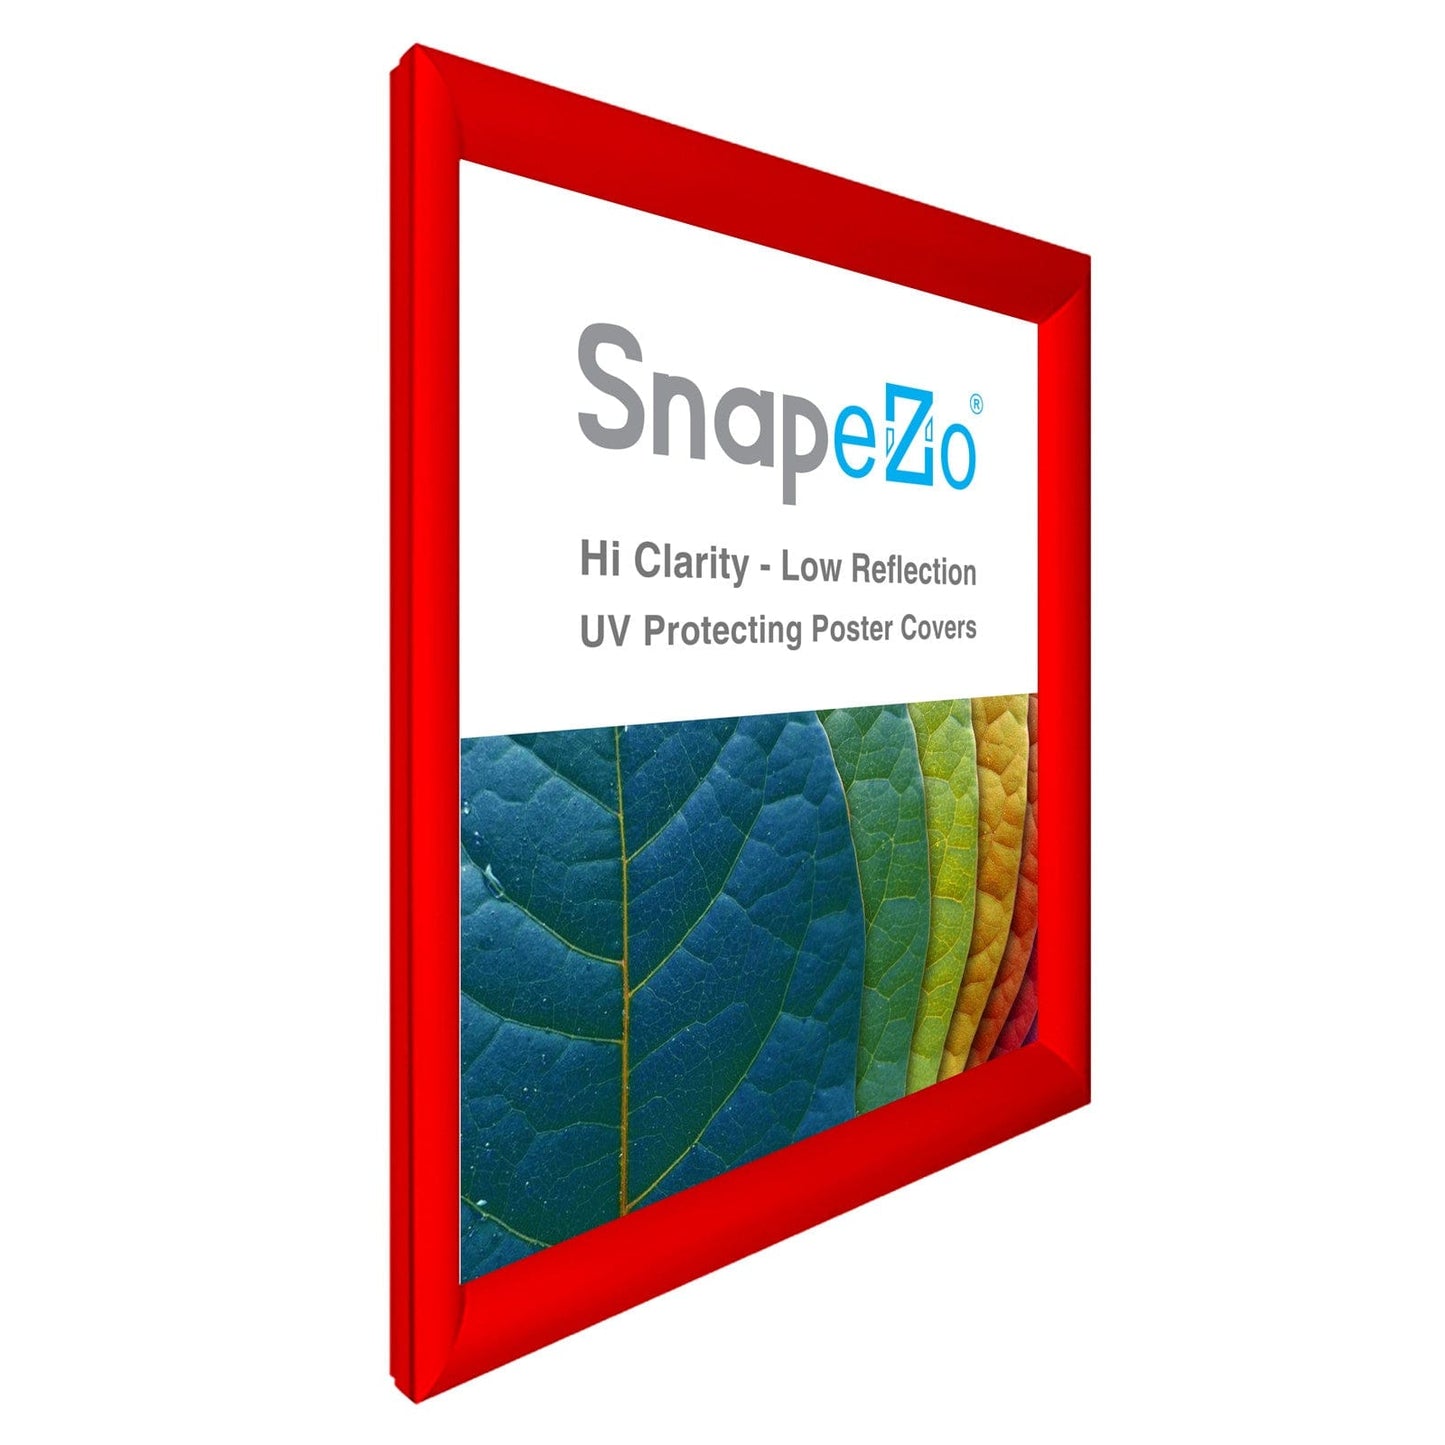 31x36 Red SnapeZo® Snap Frame - 1.2" Profile - Snap Frames Direct